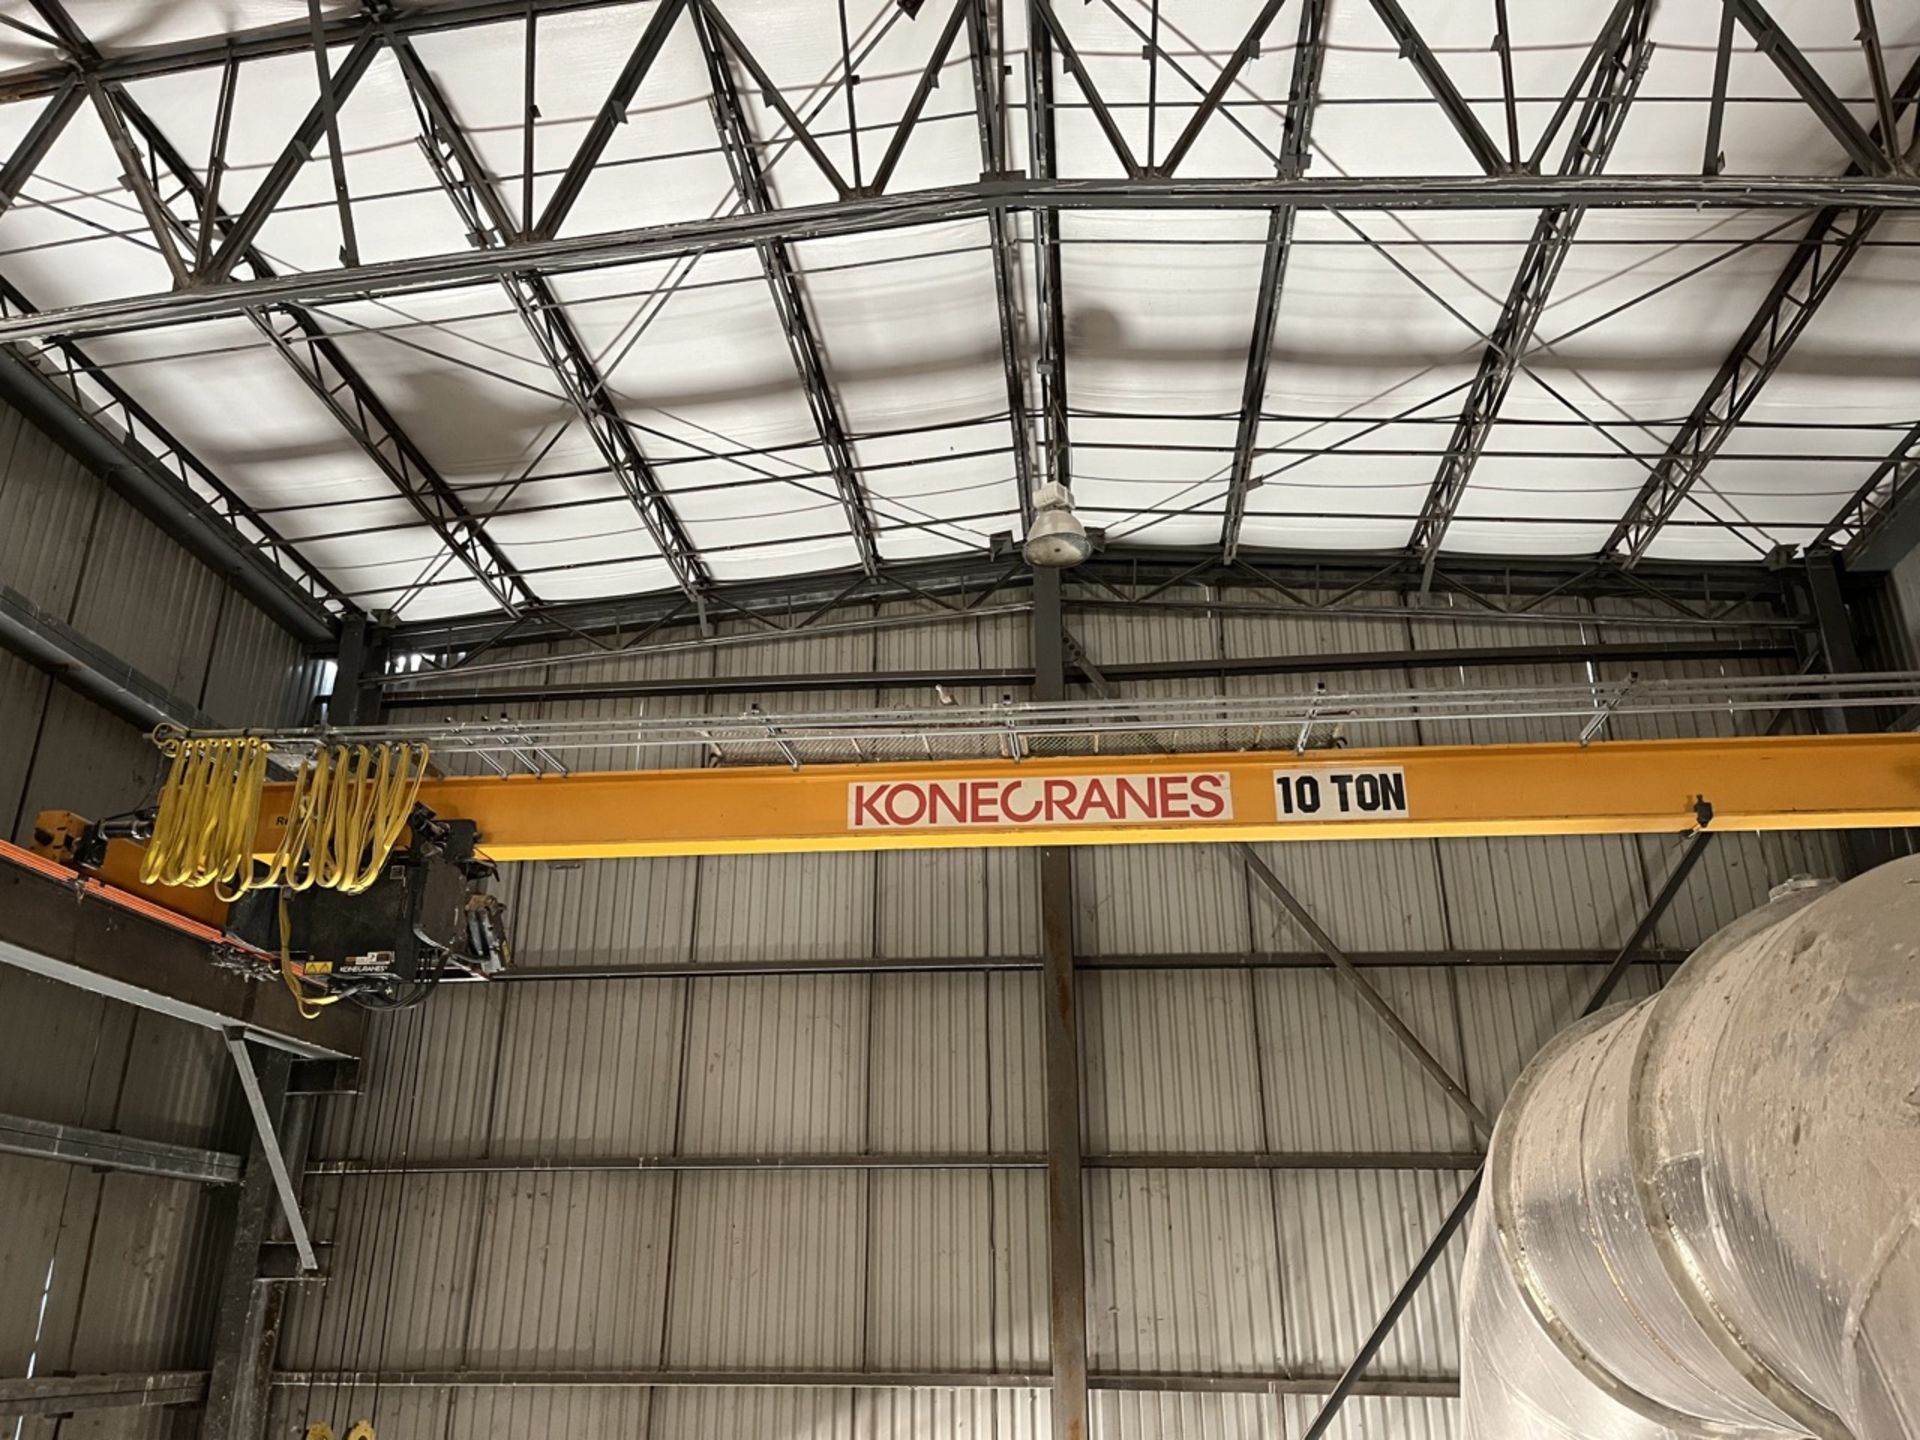 Konecranes overhead crane with a load capacity of 10 tons and a 15-meter lifting capacity; includes